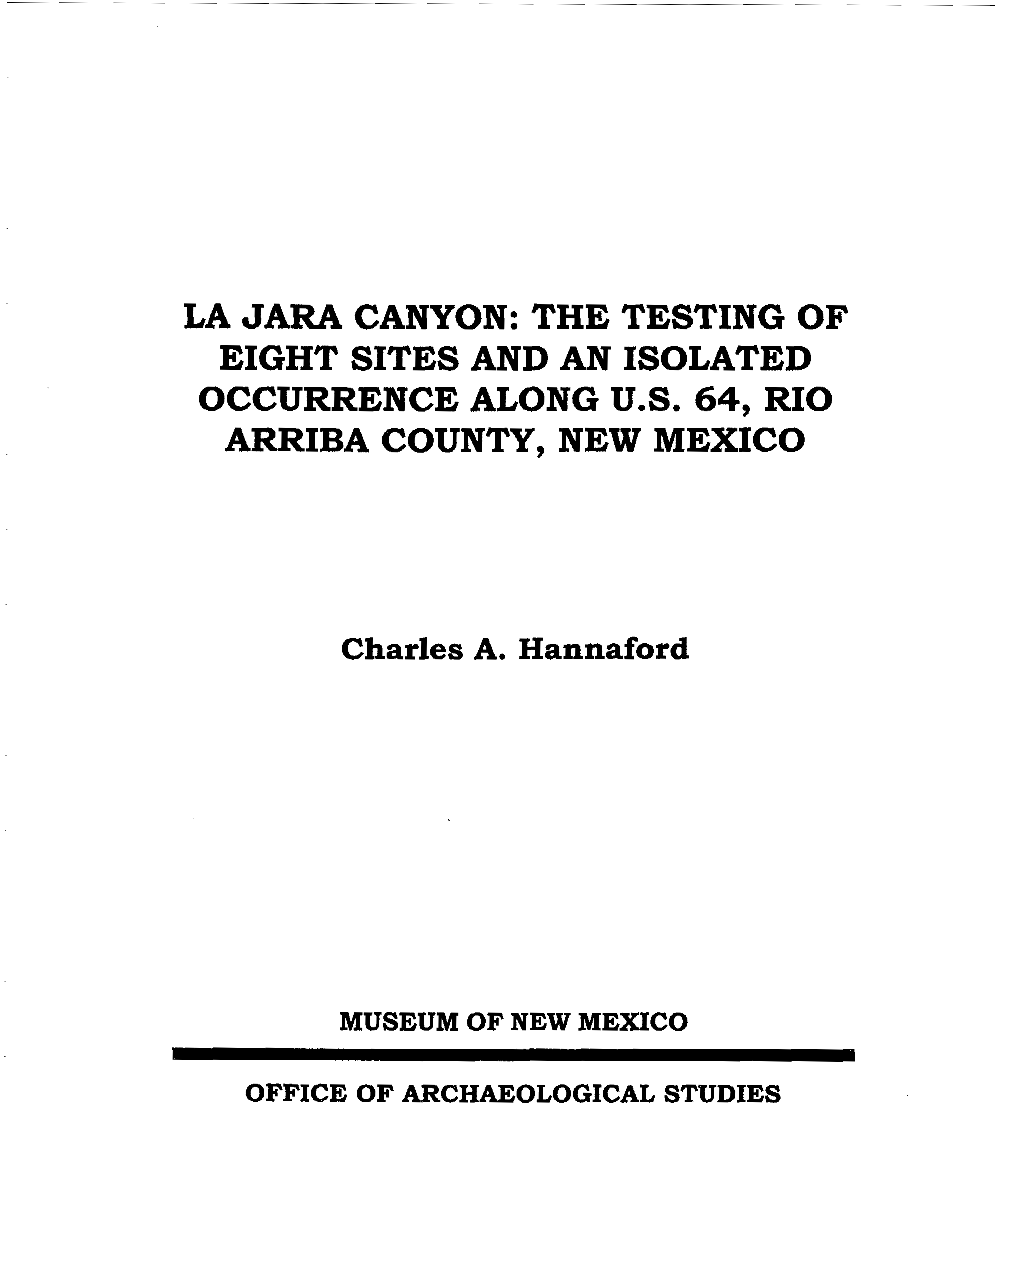 La Jam Canyon: the Testing of Eight Sites and an Isolated Occurrence Along U.S